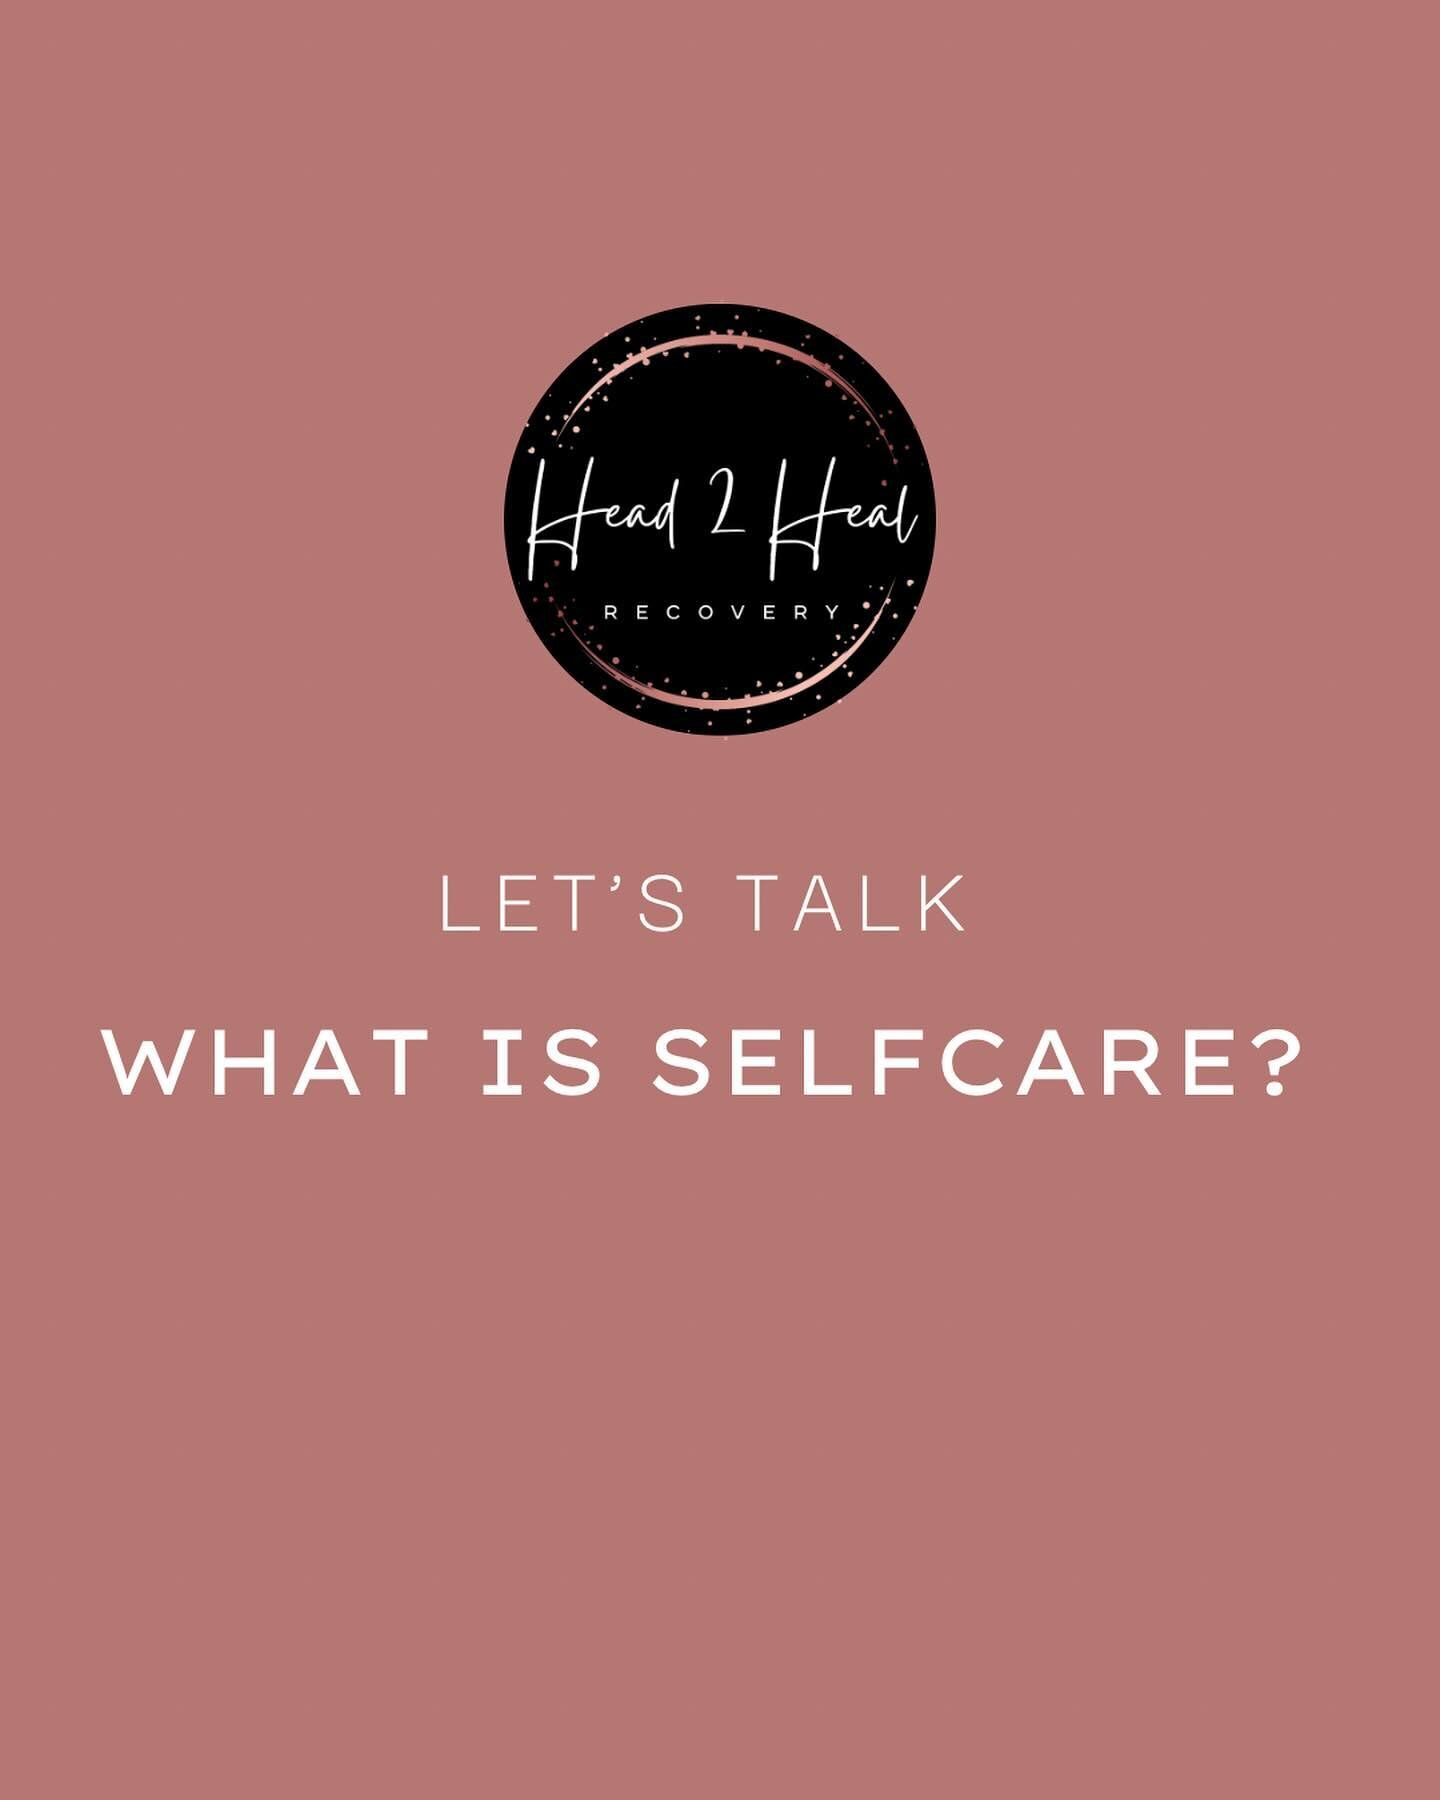 Self care is an important part of looking after your mental, emotional and physical well being. Self nurturing allows us to fill our cups with good feelings and recharge those batteries. 
Ice baths and sauna usage is a great way to soothe your body a